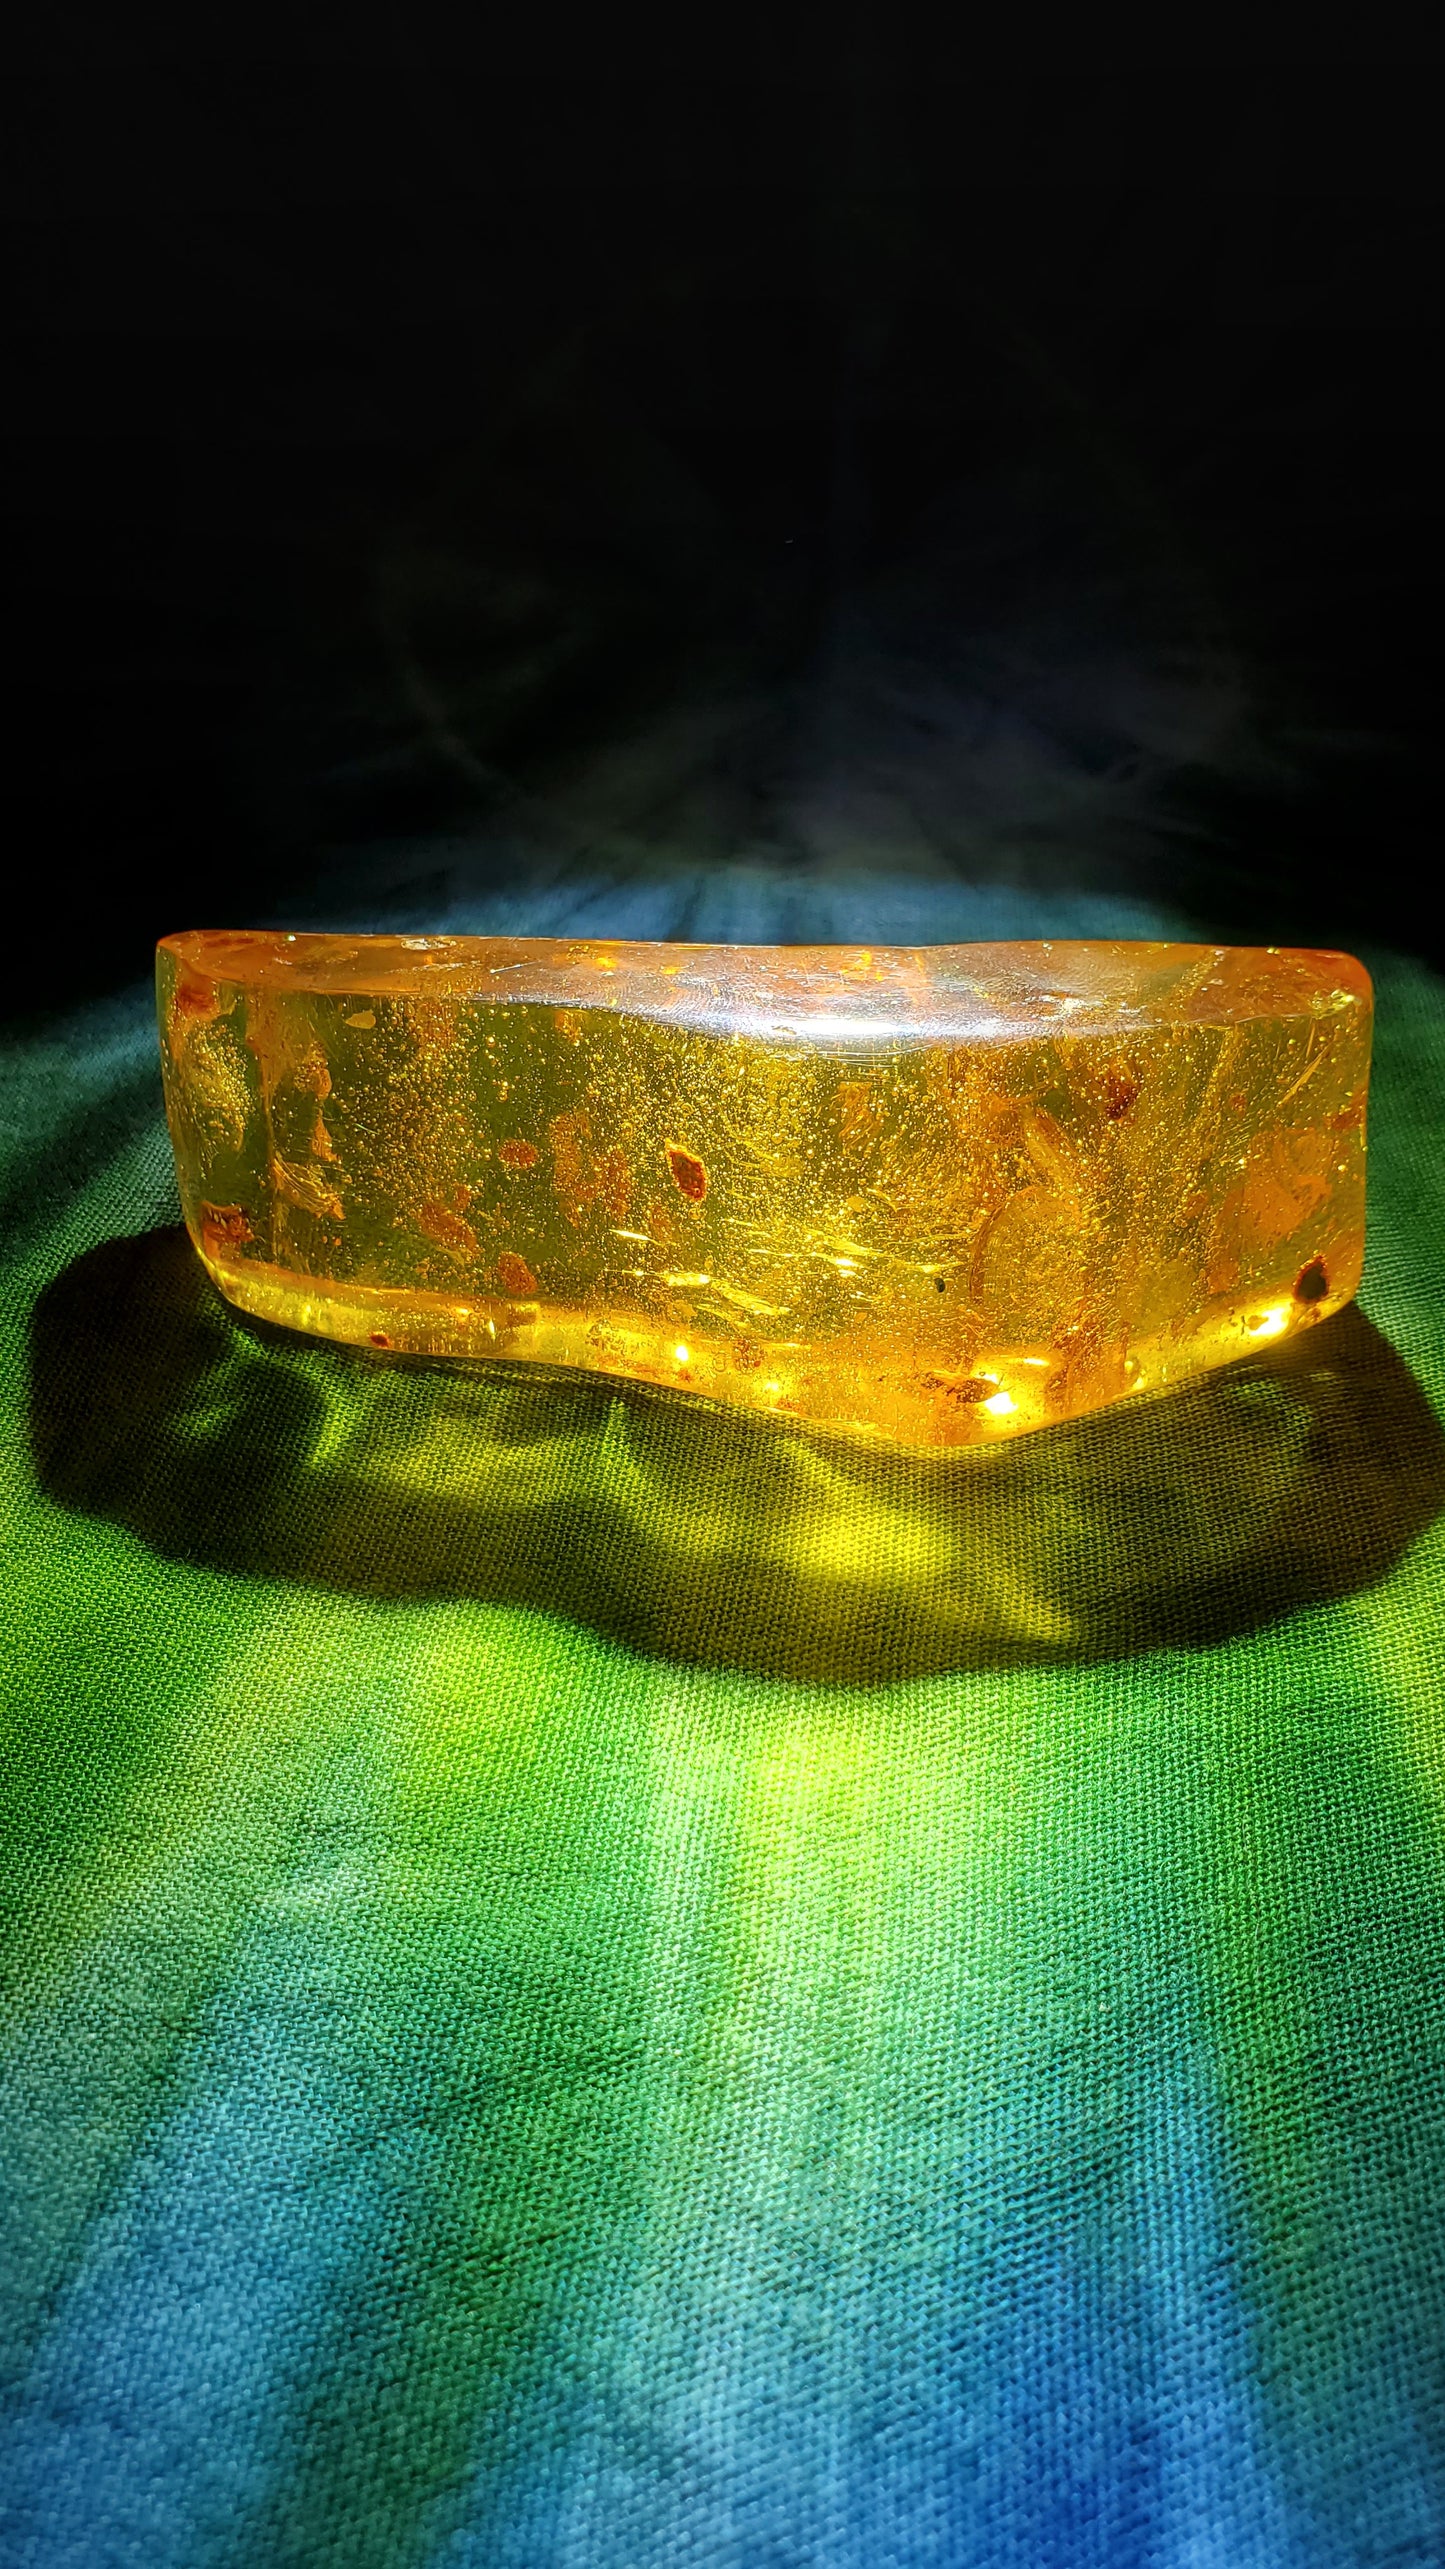 Baltic Amber with Insects